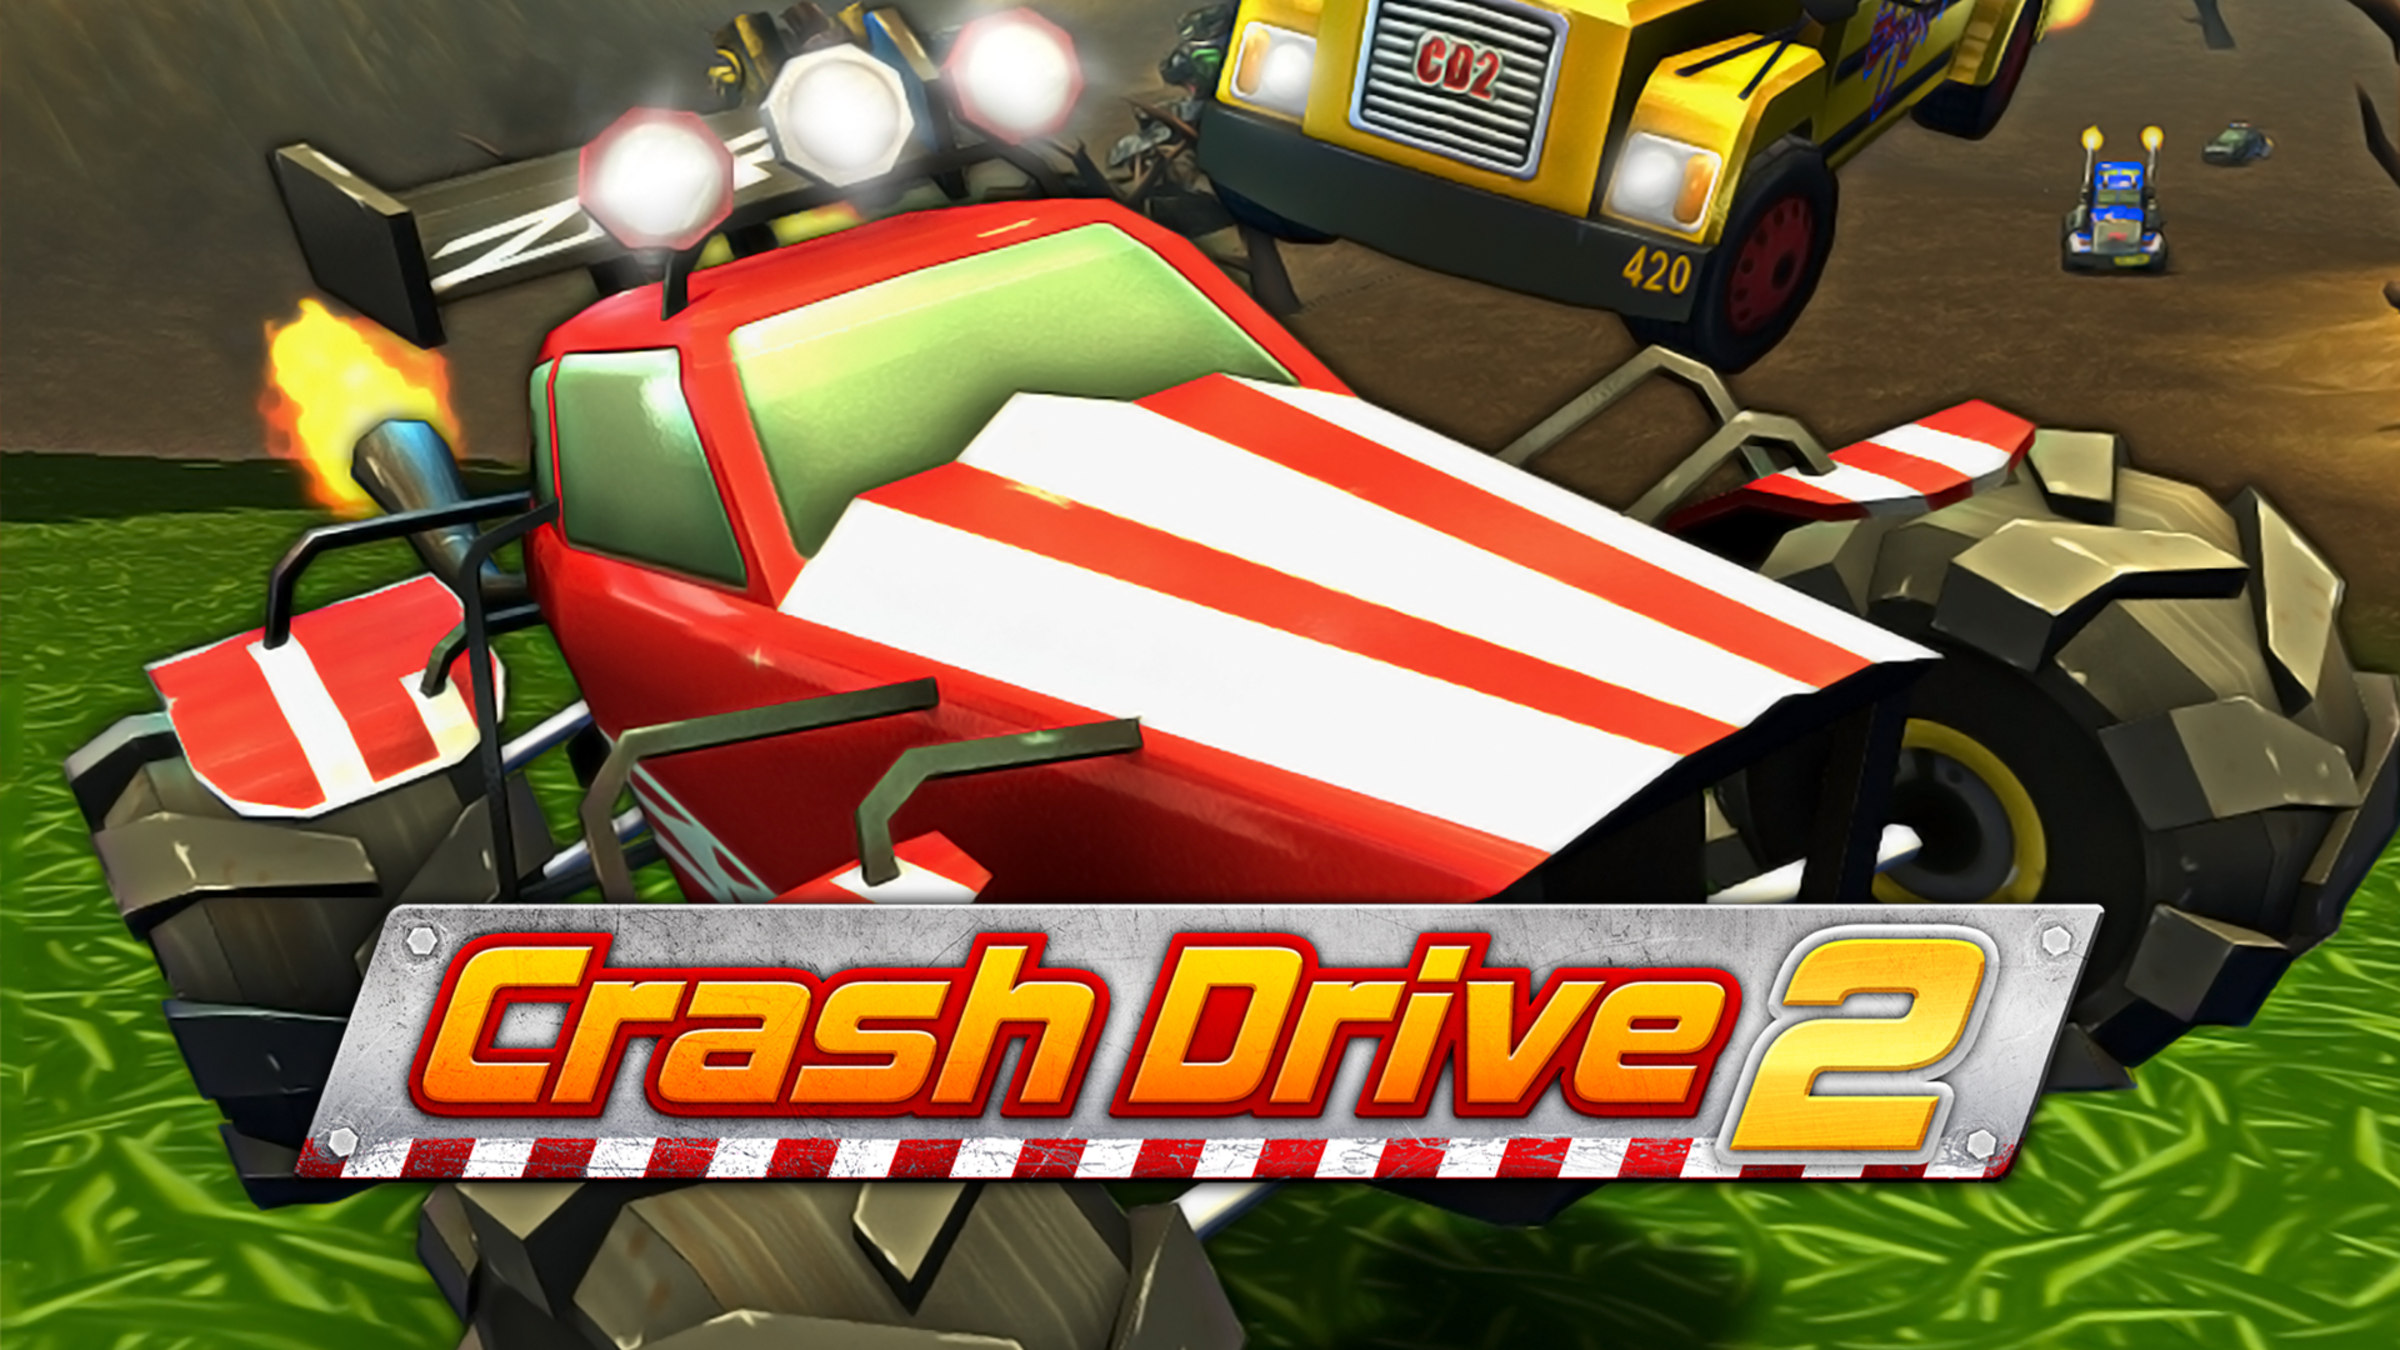 Crash Drive 2
open world android games